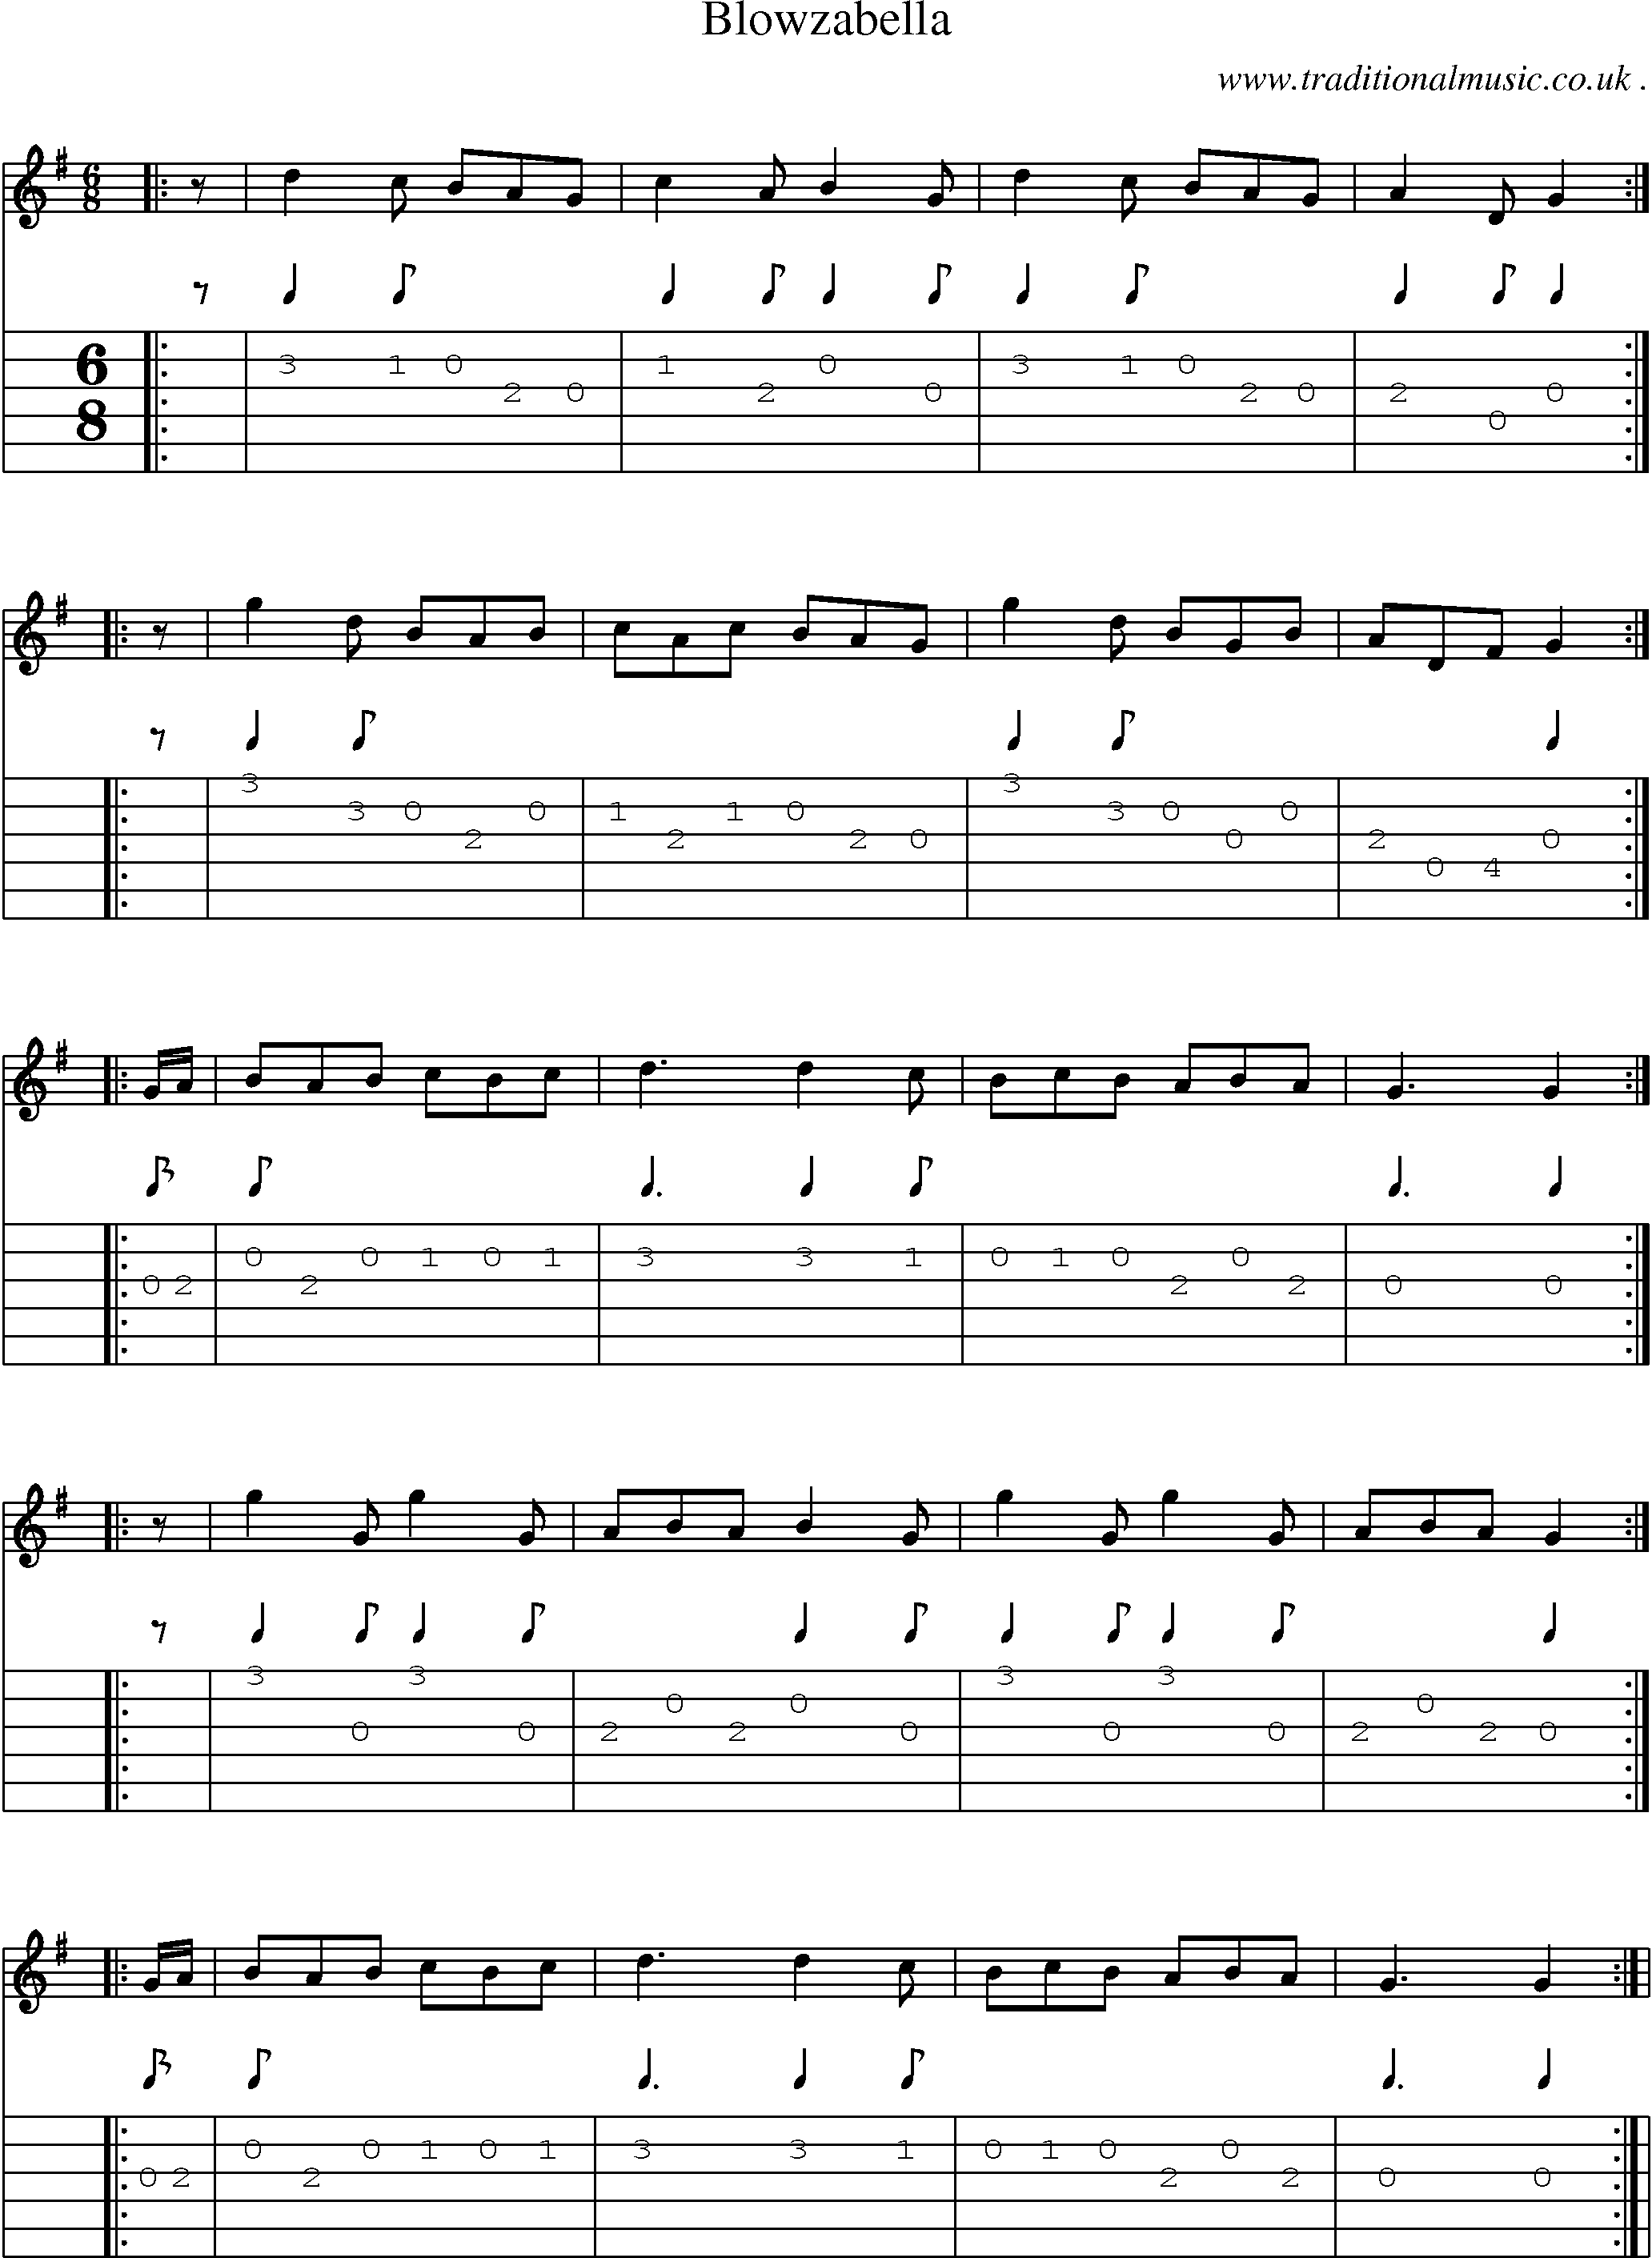 Sheet-Music and Guitar Tabs for Blowzabella